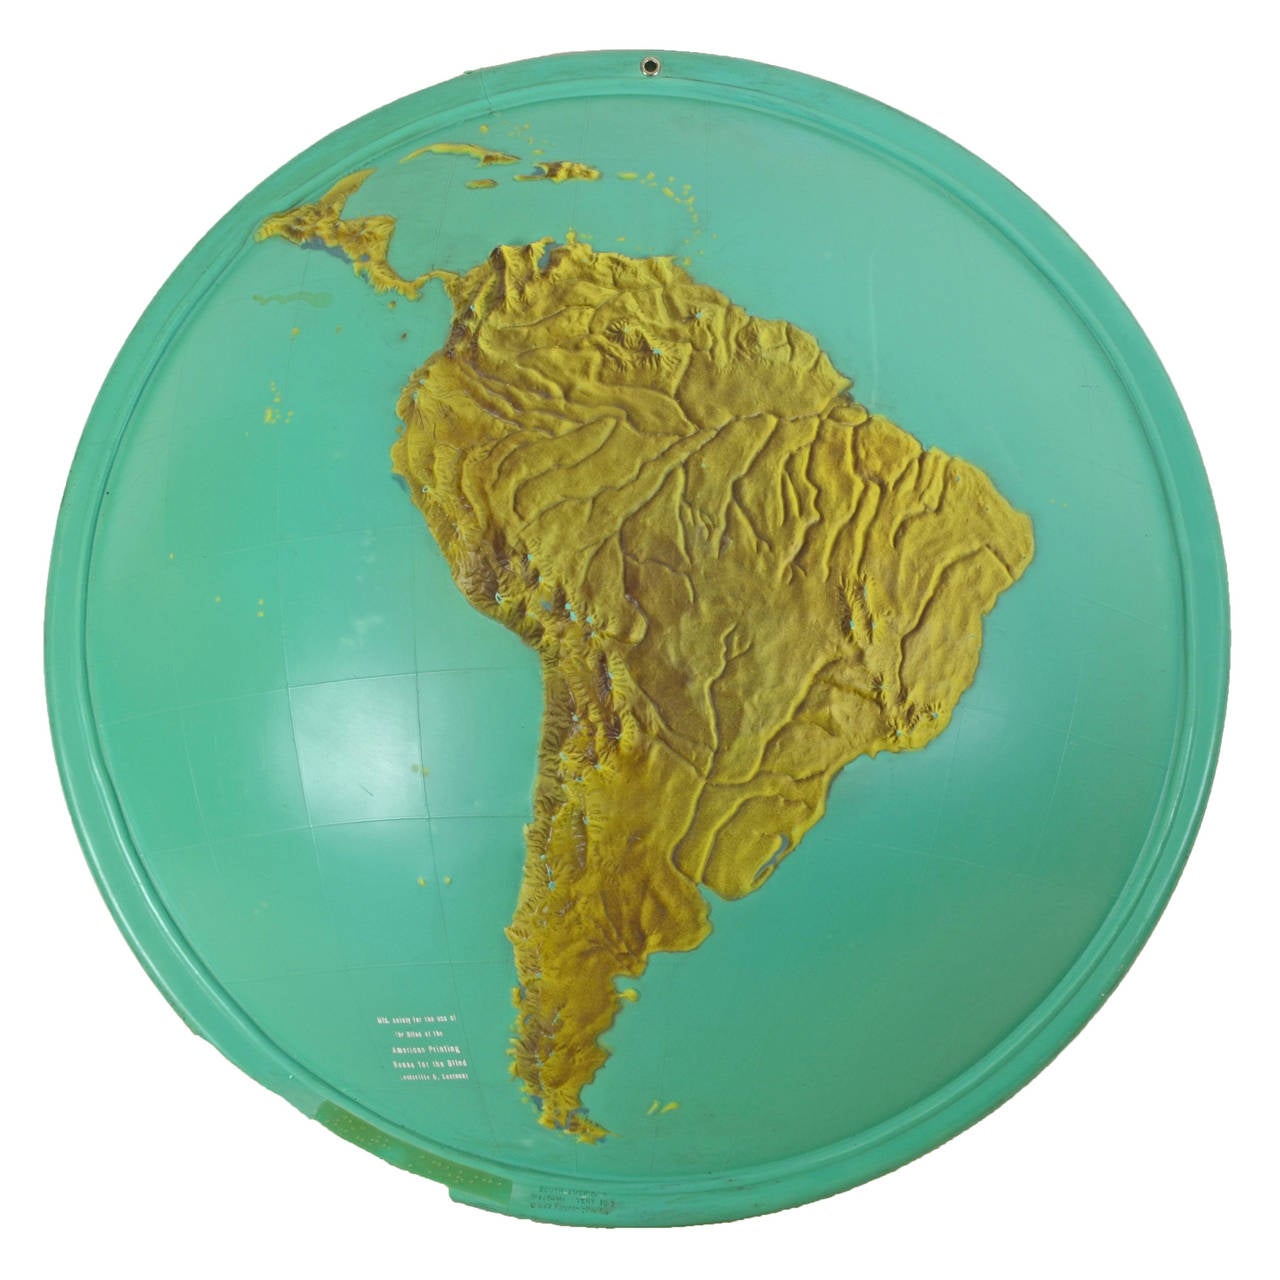 Produced by the American Printing House for the blind, this extremely rare set of educational relief half-spheres depicts five different sections of the world: Asia, Australia and surrounding islands, South America, the Arctic Gap and Africa. The